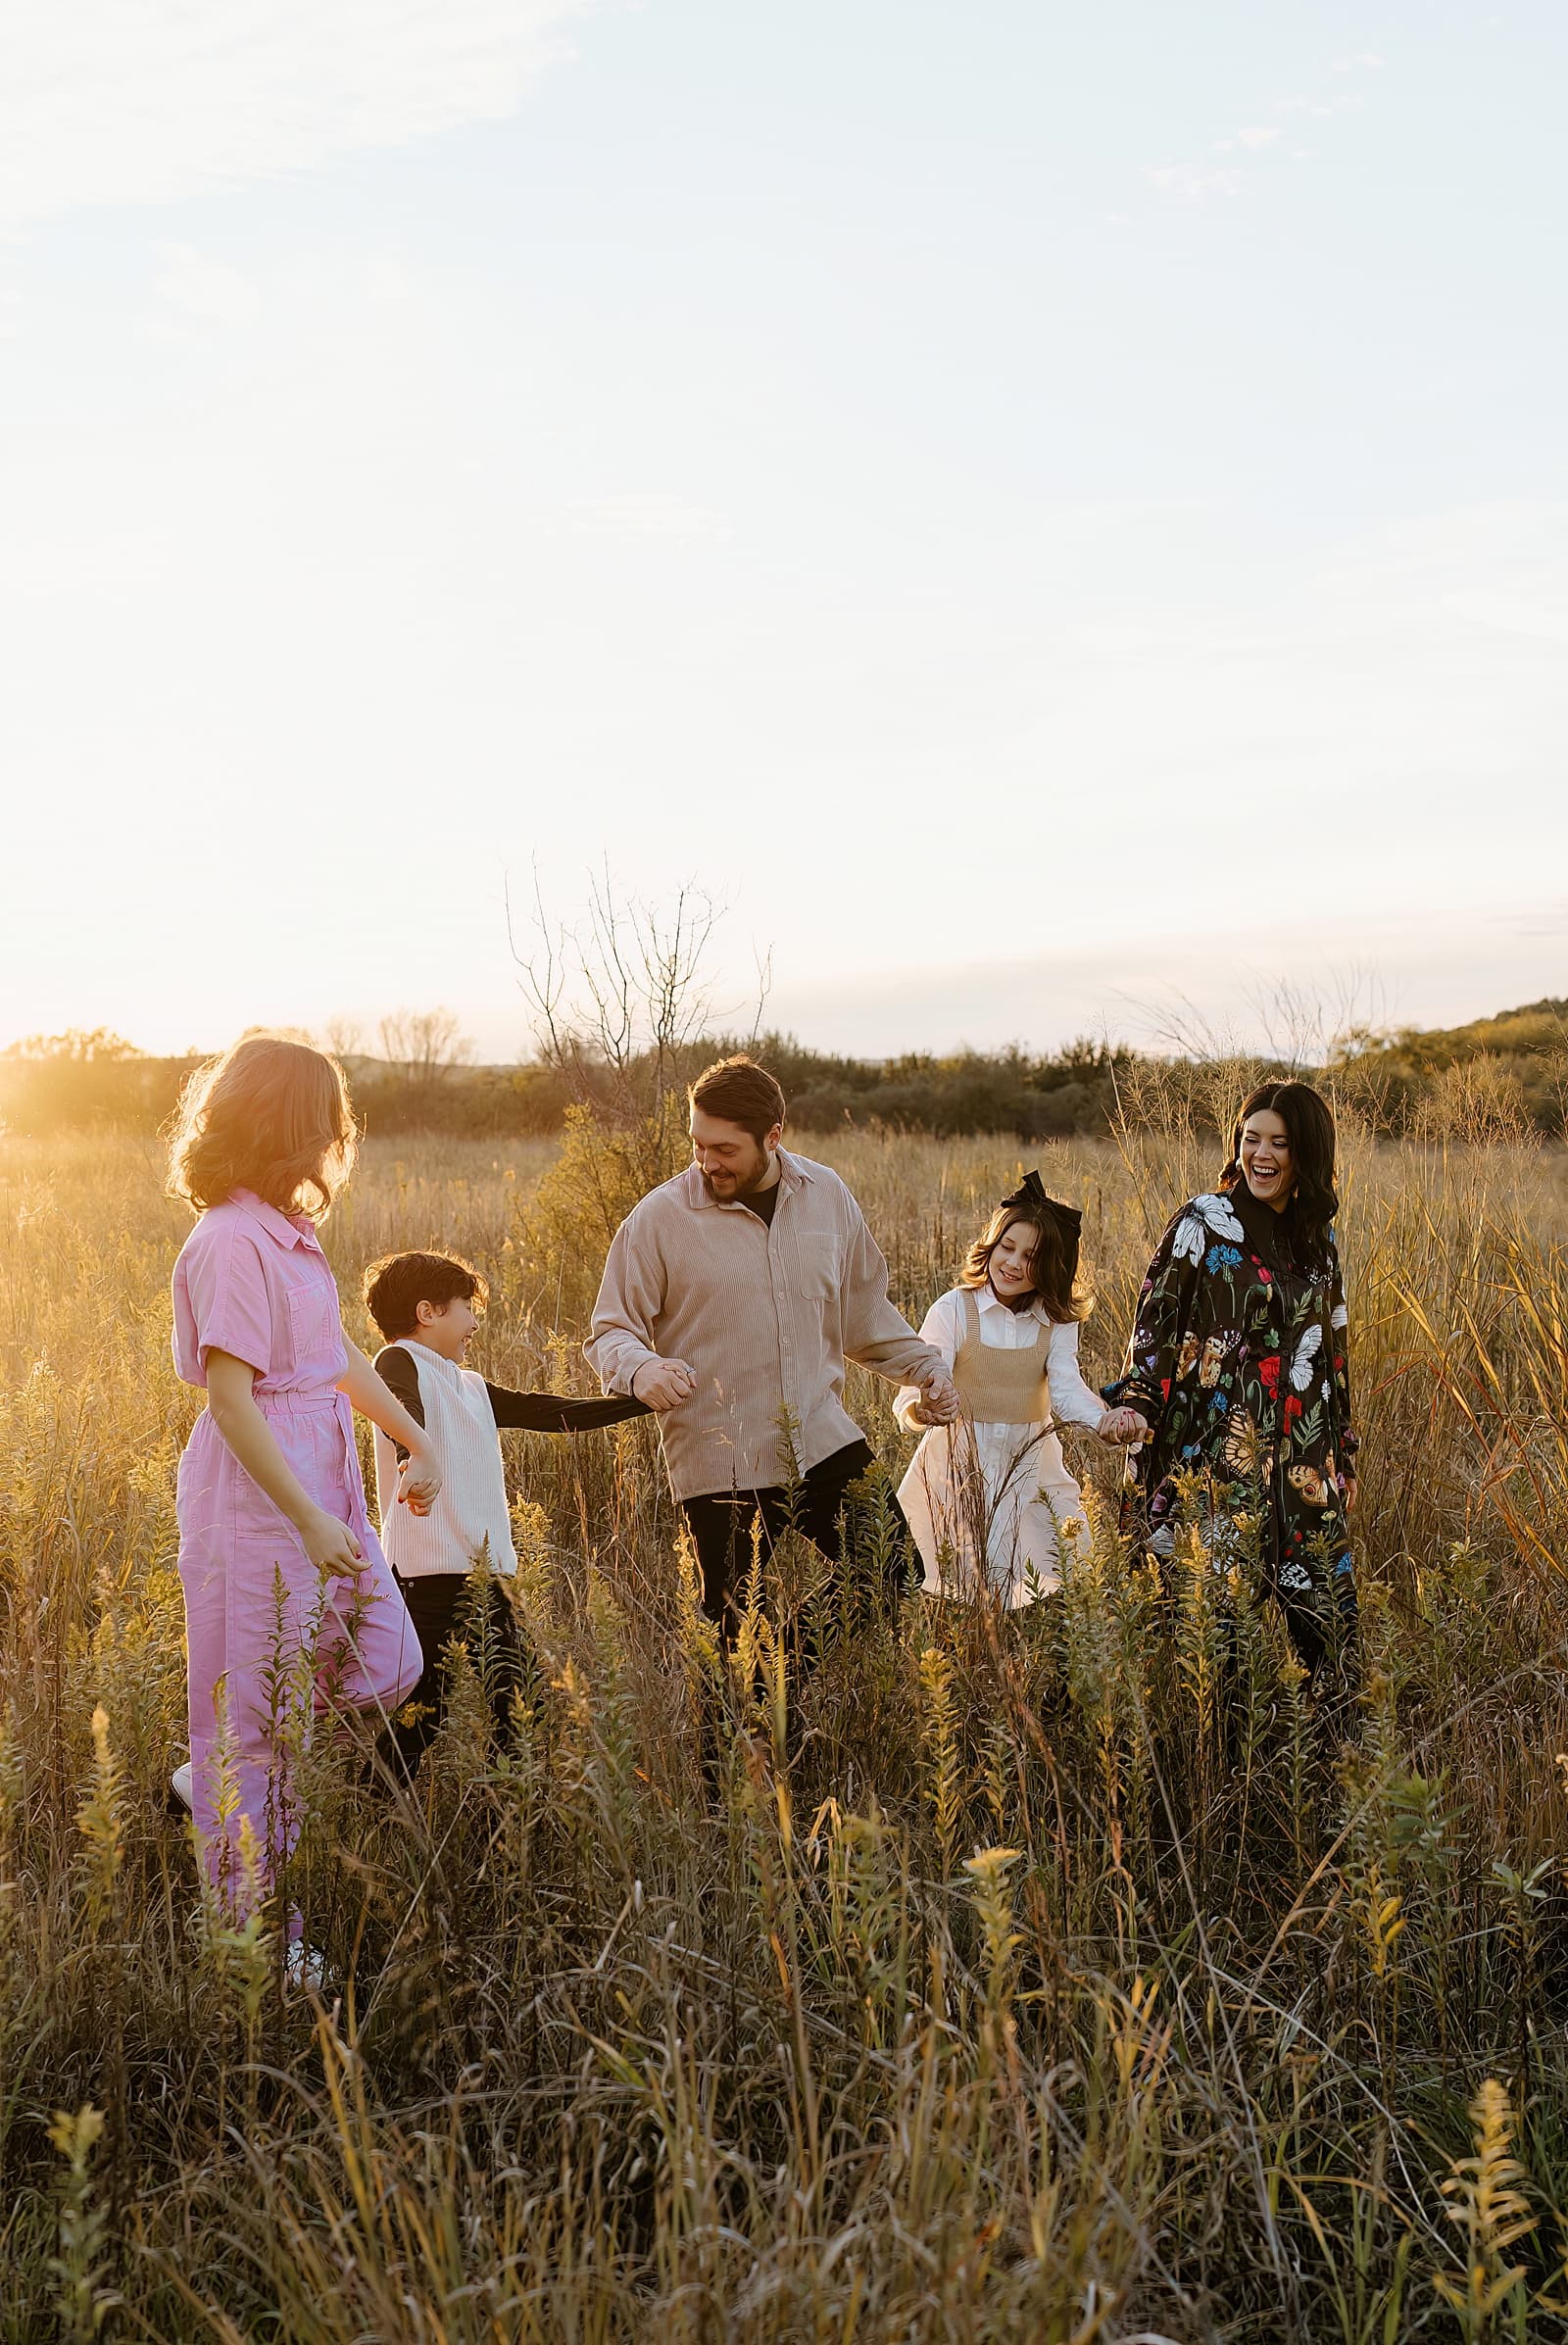 Family walk together in field showing off the best Colorful Family Photo Outfit Inspiration